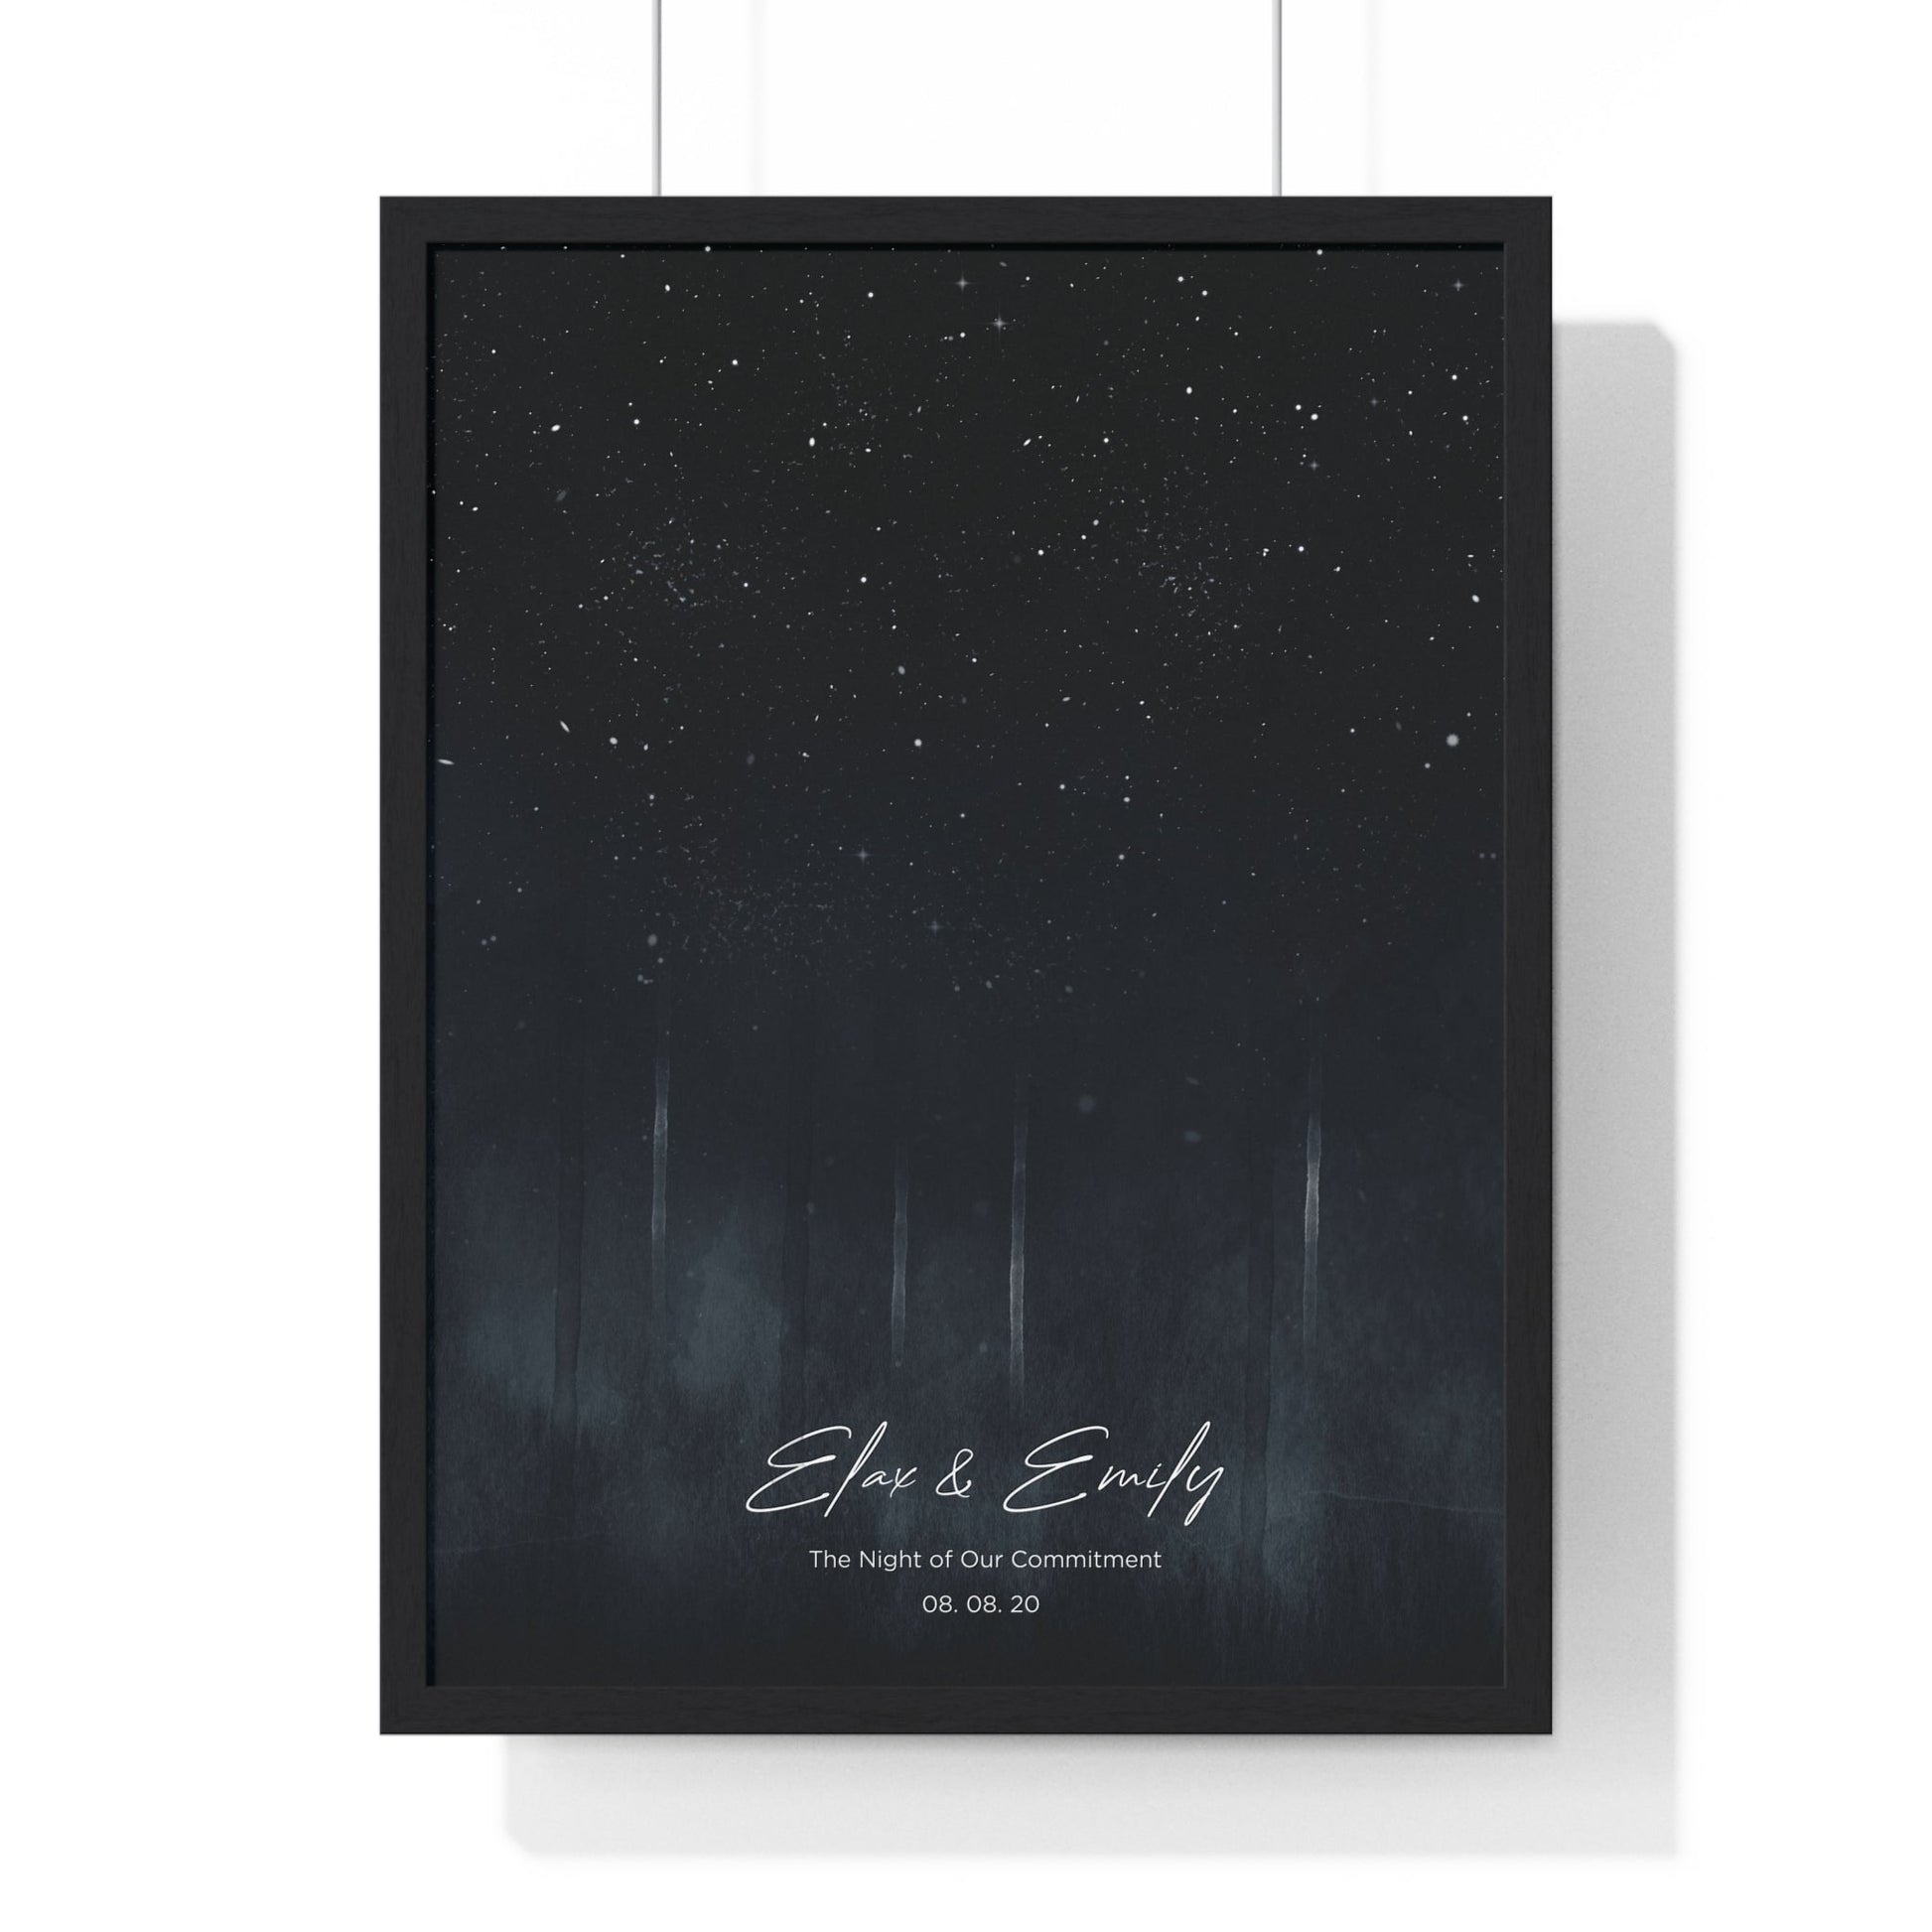 Personalized star map: A timeless gift capturing cherished celestial moments.